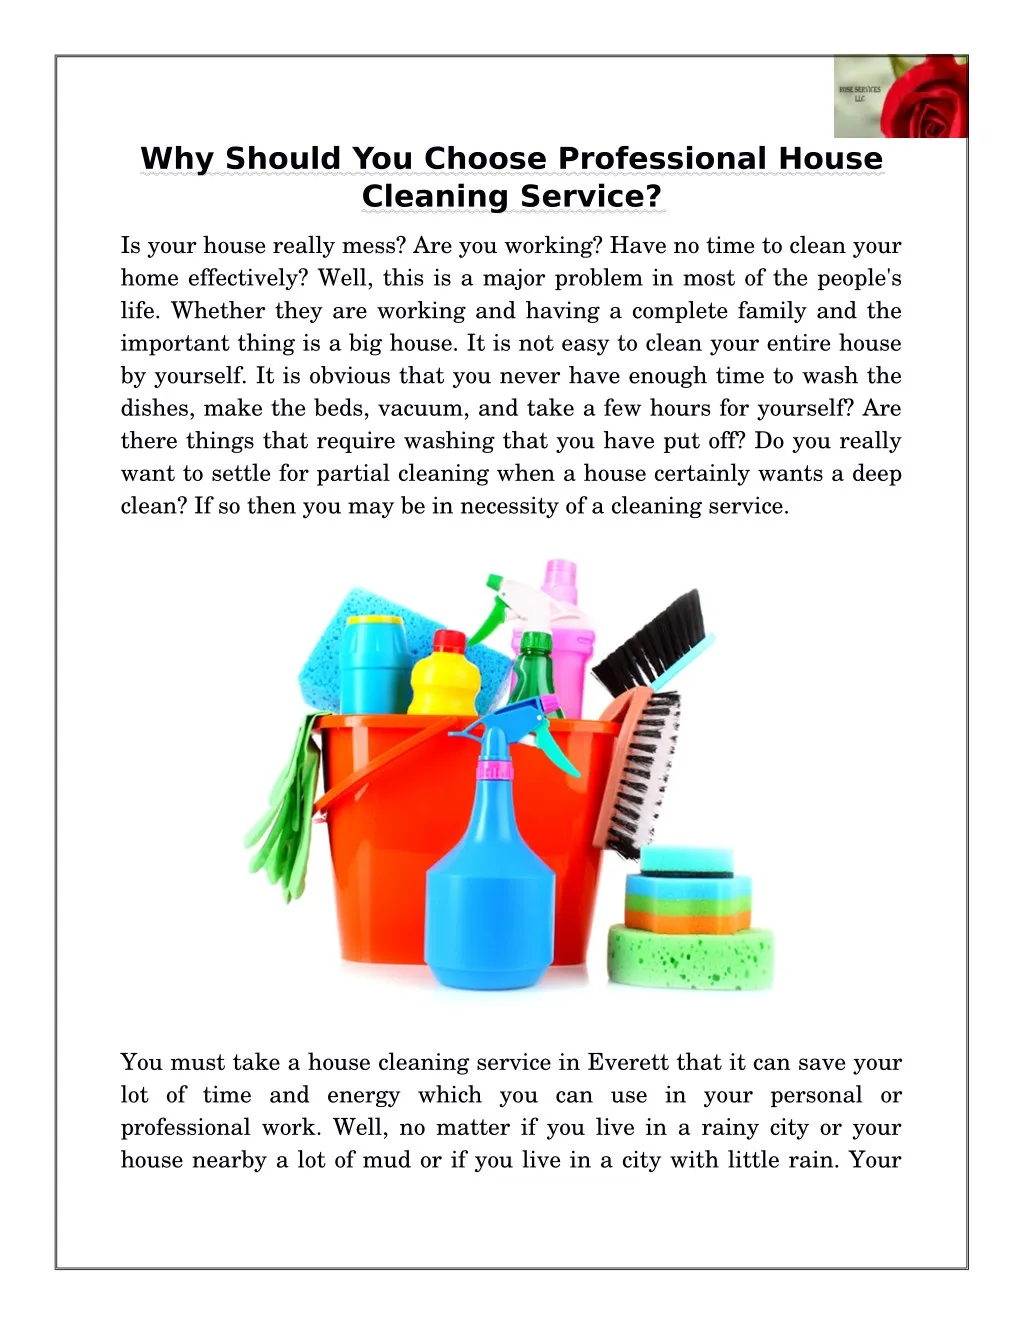 why should you choose professional house cleaning